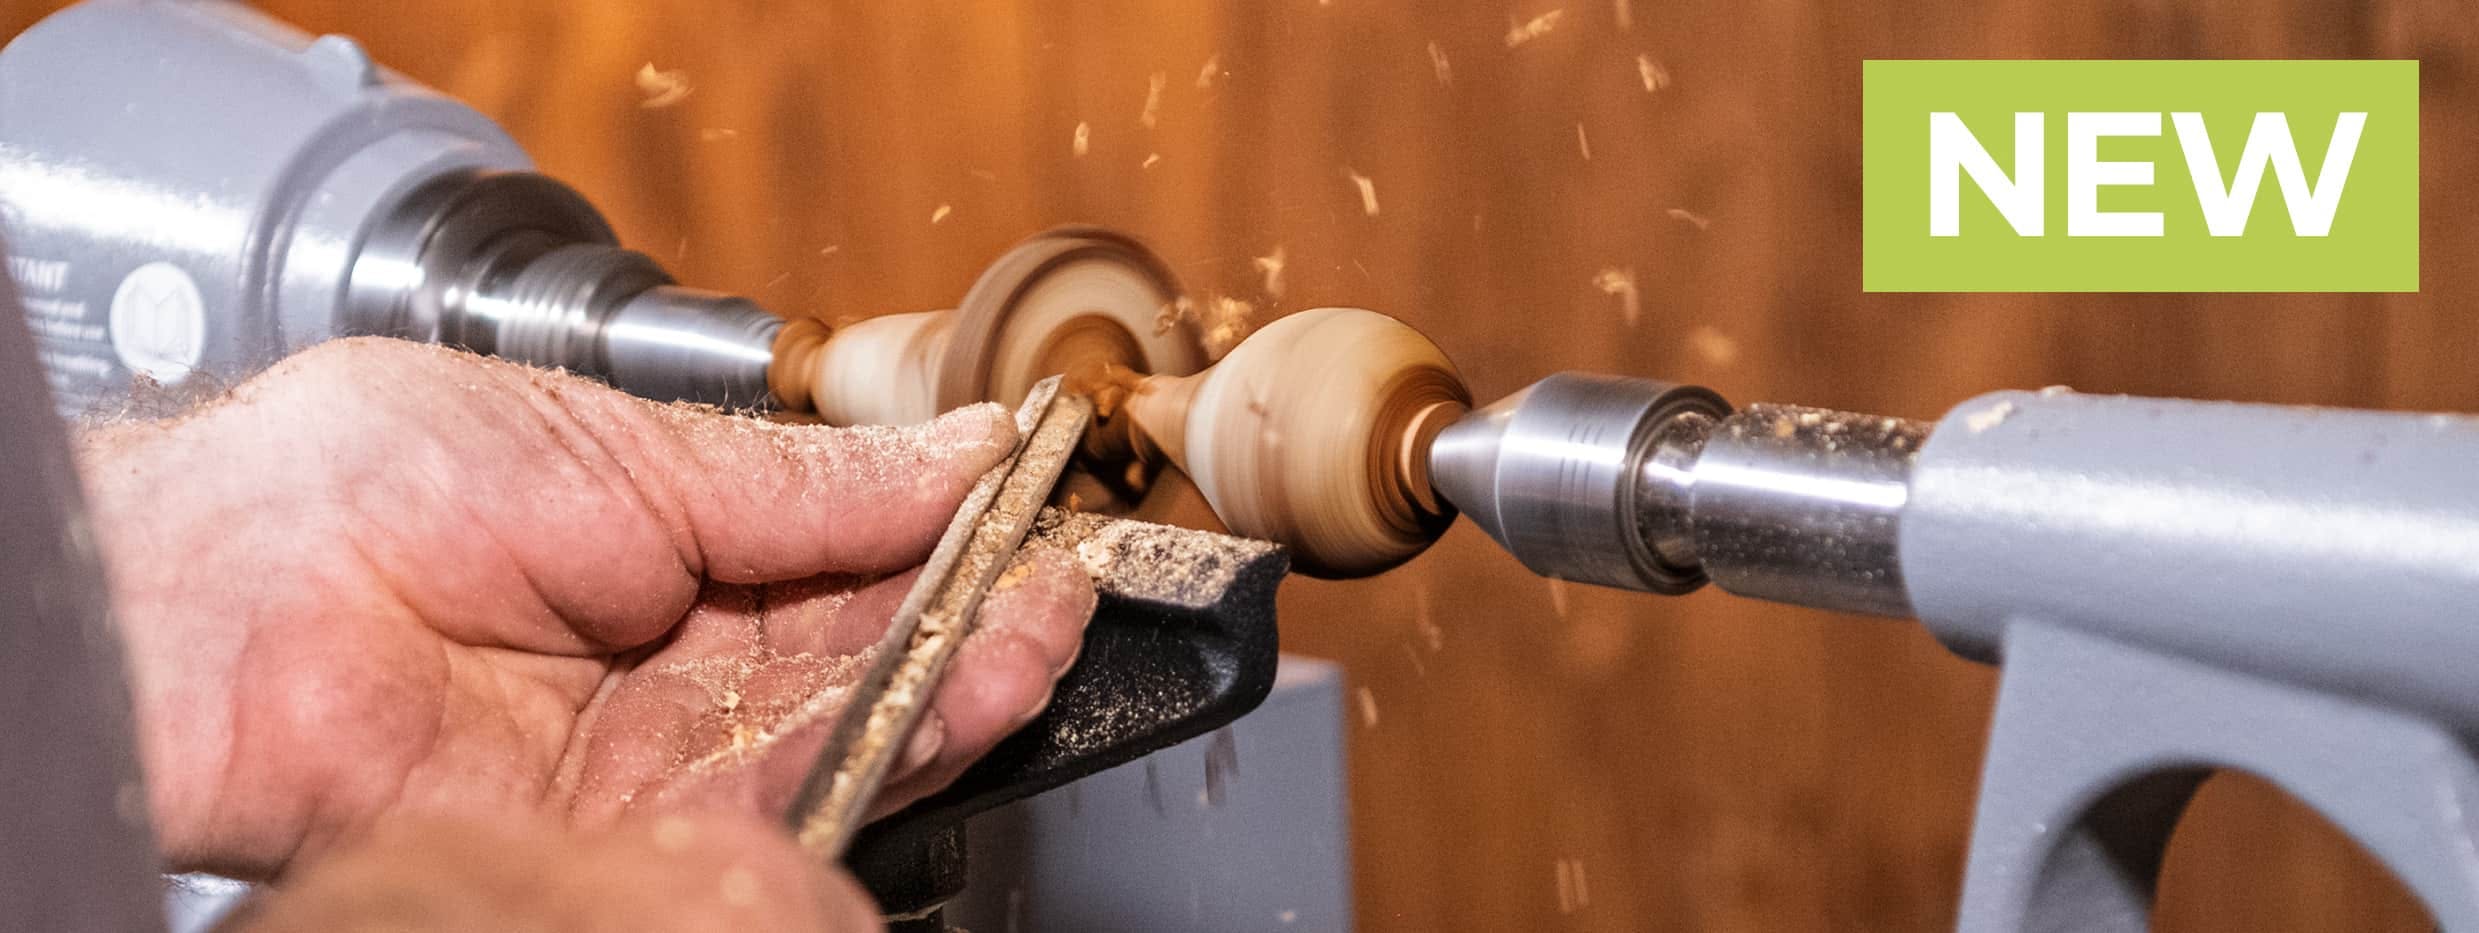 Online woodturning course